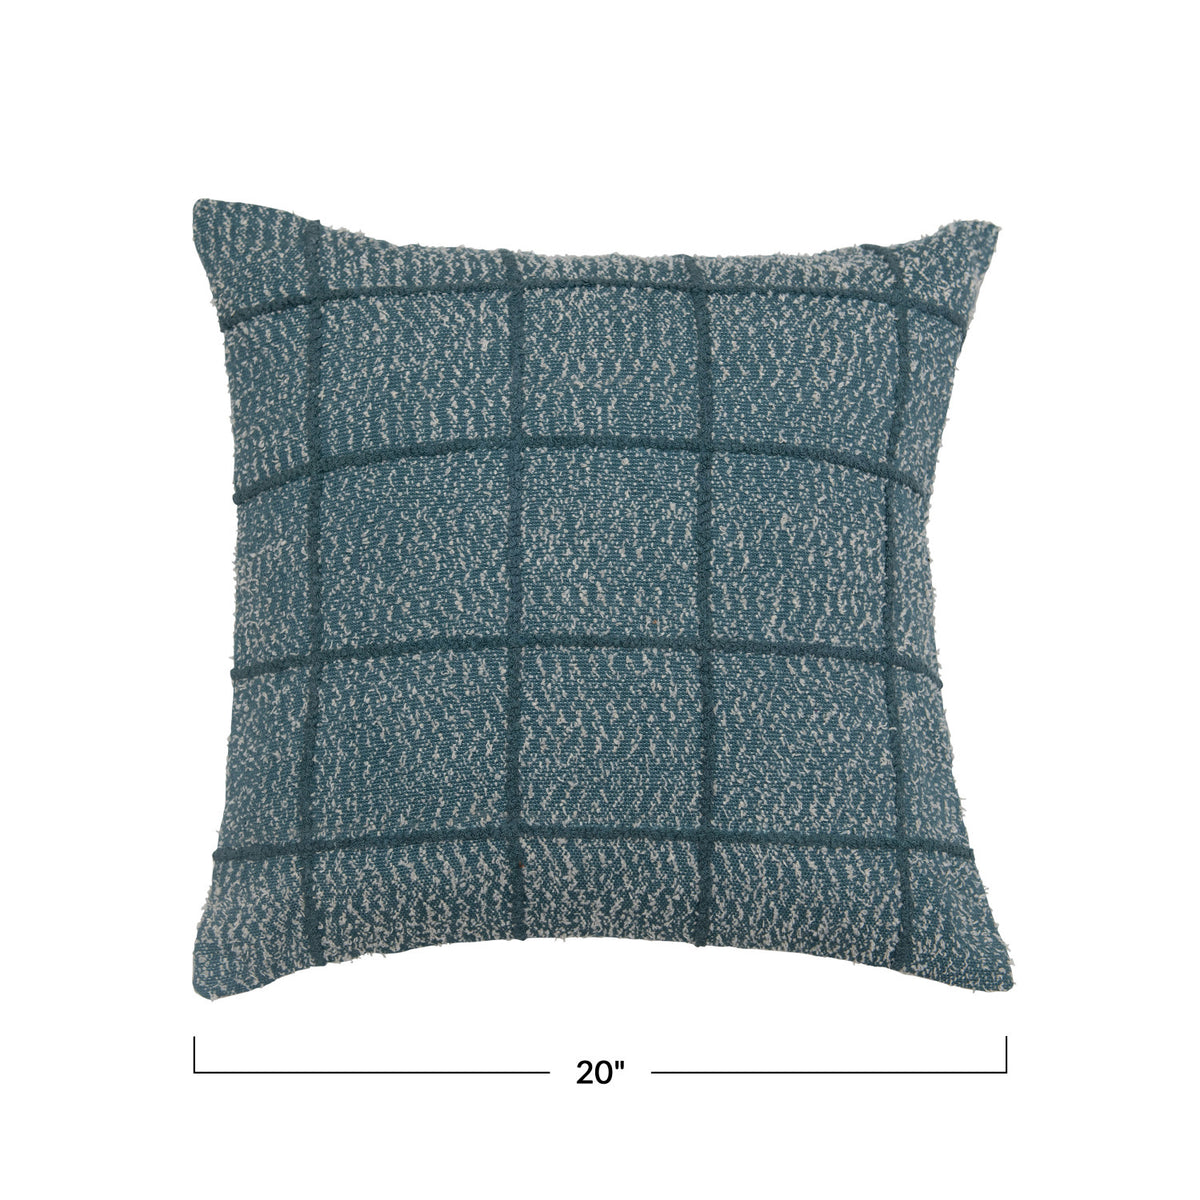 20"S Woven Cotton Pillow w/Embroidered Grid Pattern